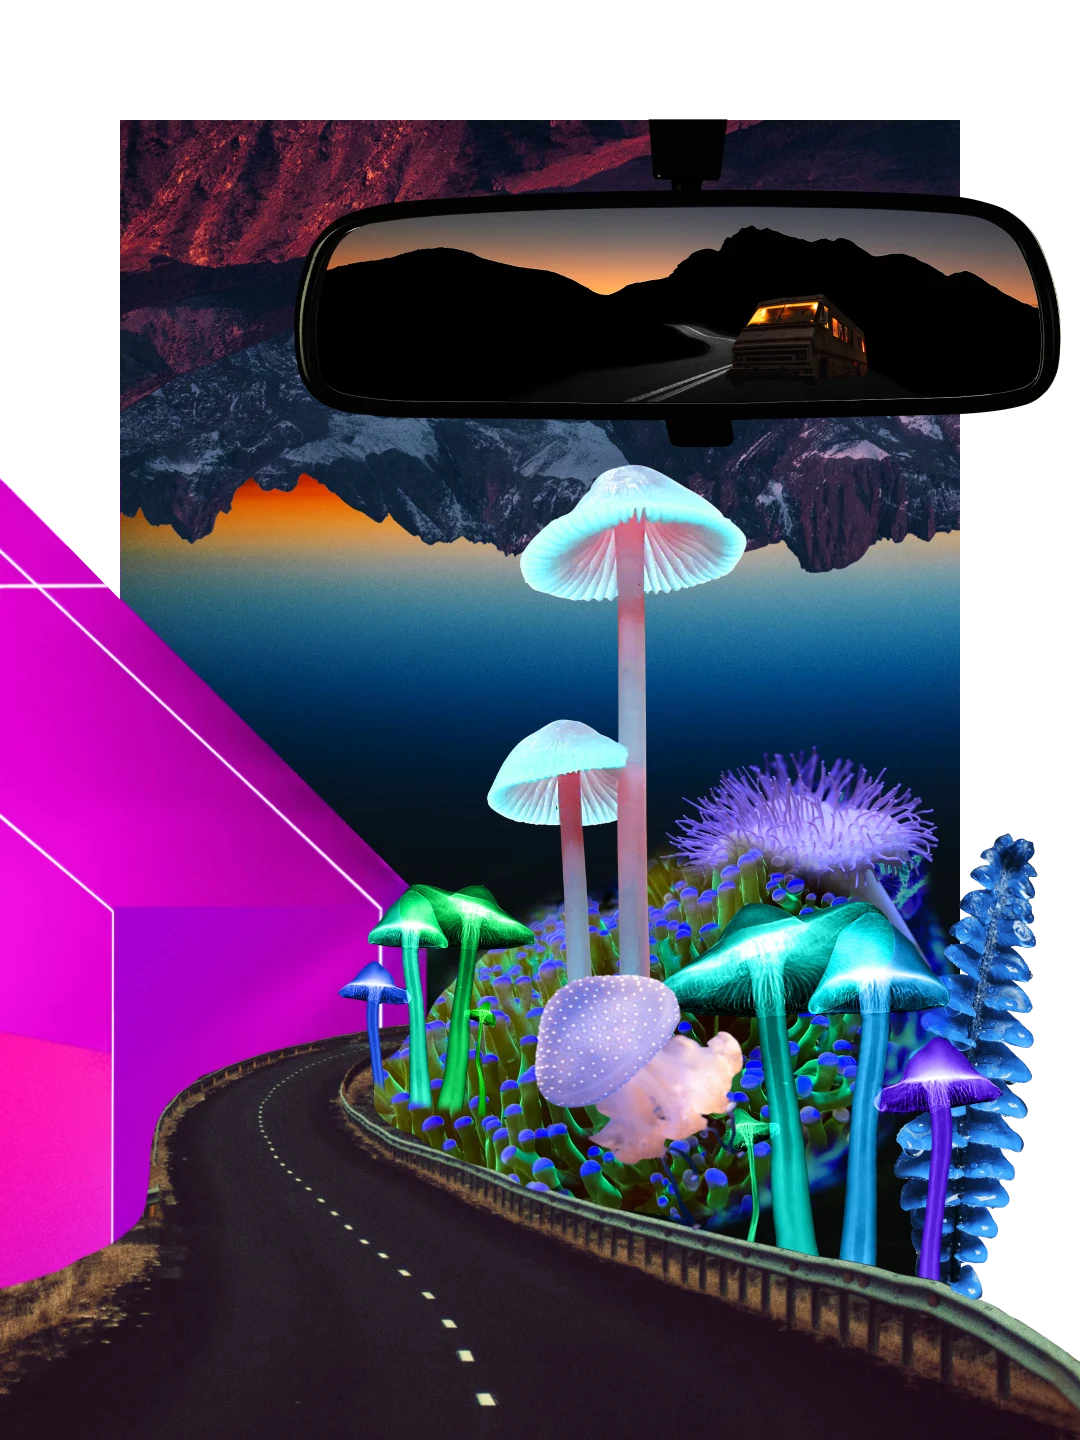 Vibrant collage of nighttime themes. Neon pink geometric shape on the left, with dark mountain formations and large cartoon mushrooms in the foreground. Rearview mirror view at top with minivan, road and mountains at sunset.
